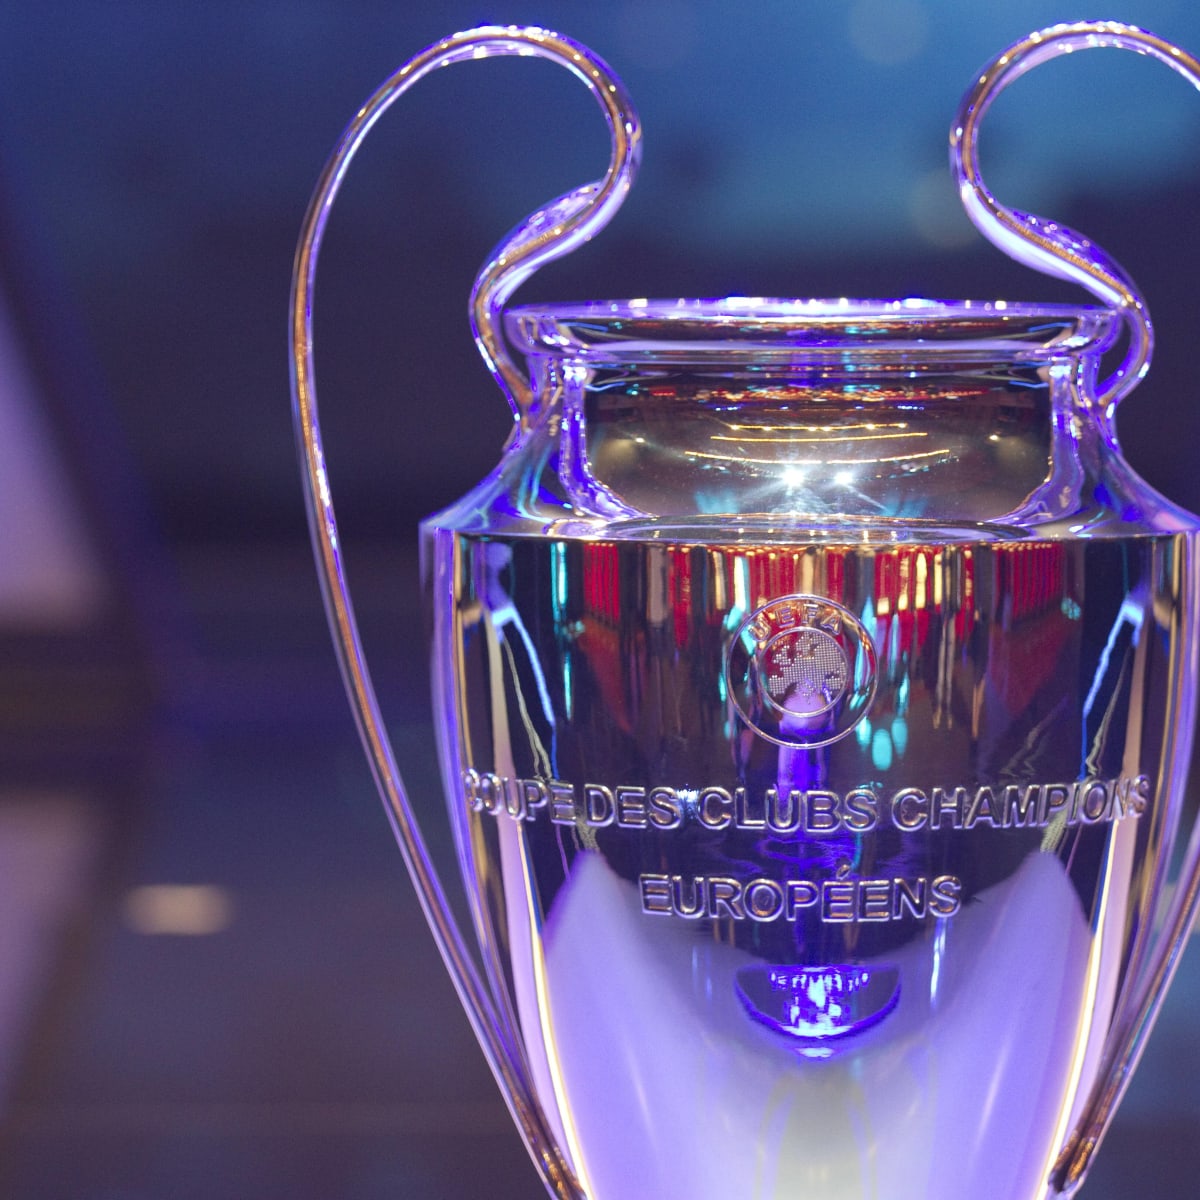 Champions League 2022-23 prize money: How much will winners of Man